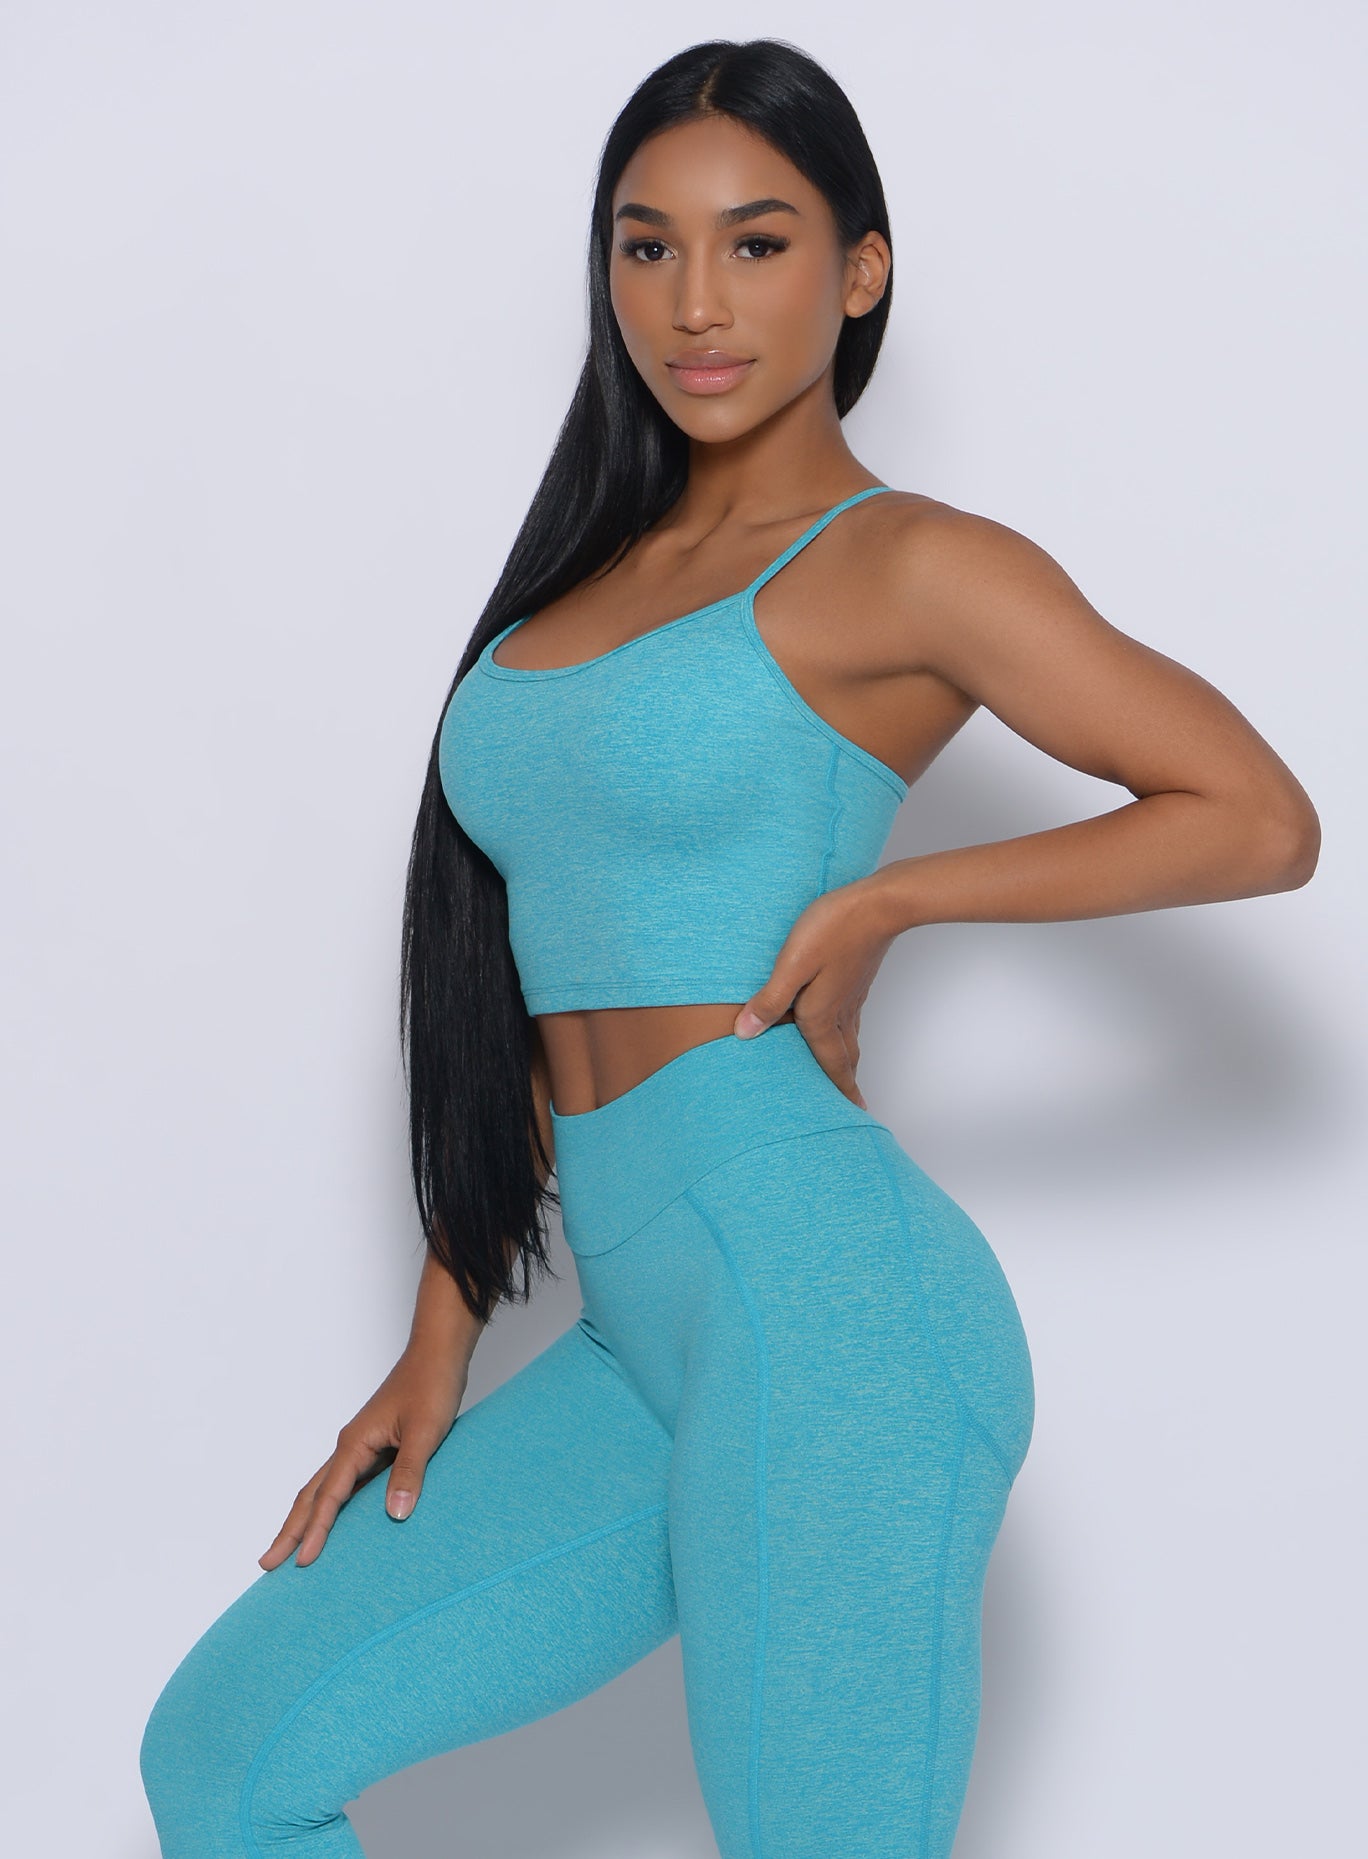 Right side view of a model angled right wearing our relax sports bra in crystal blue color and a matching leggings